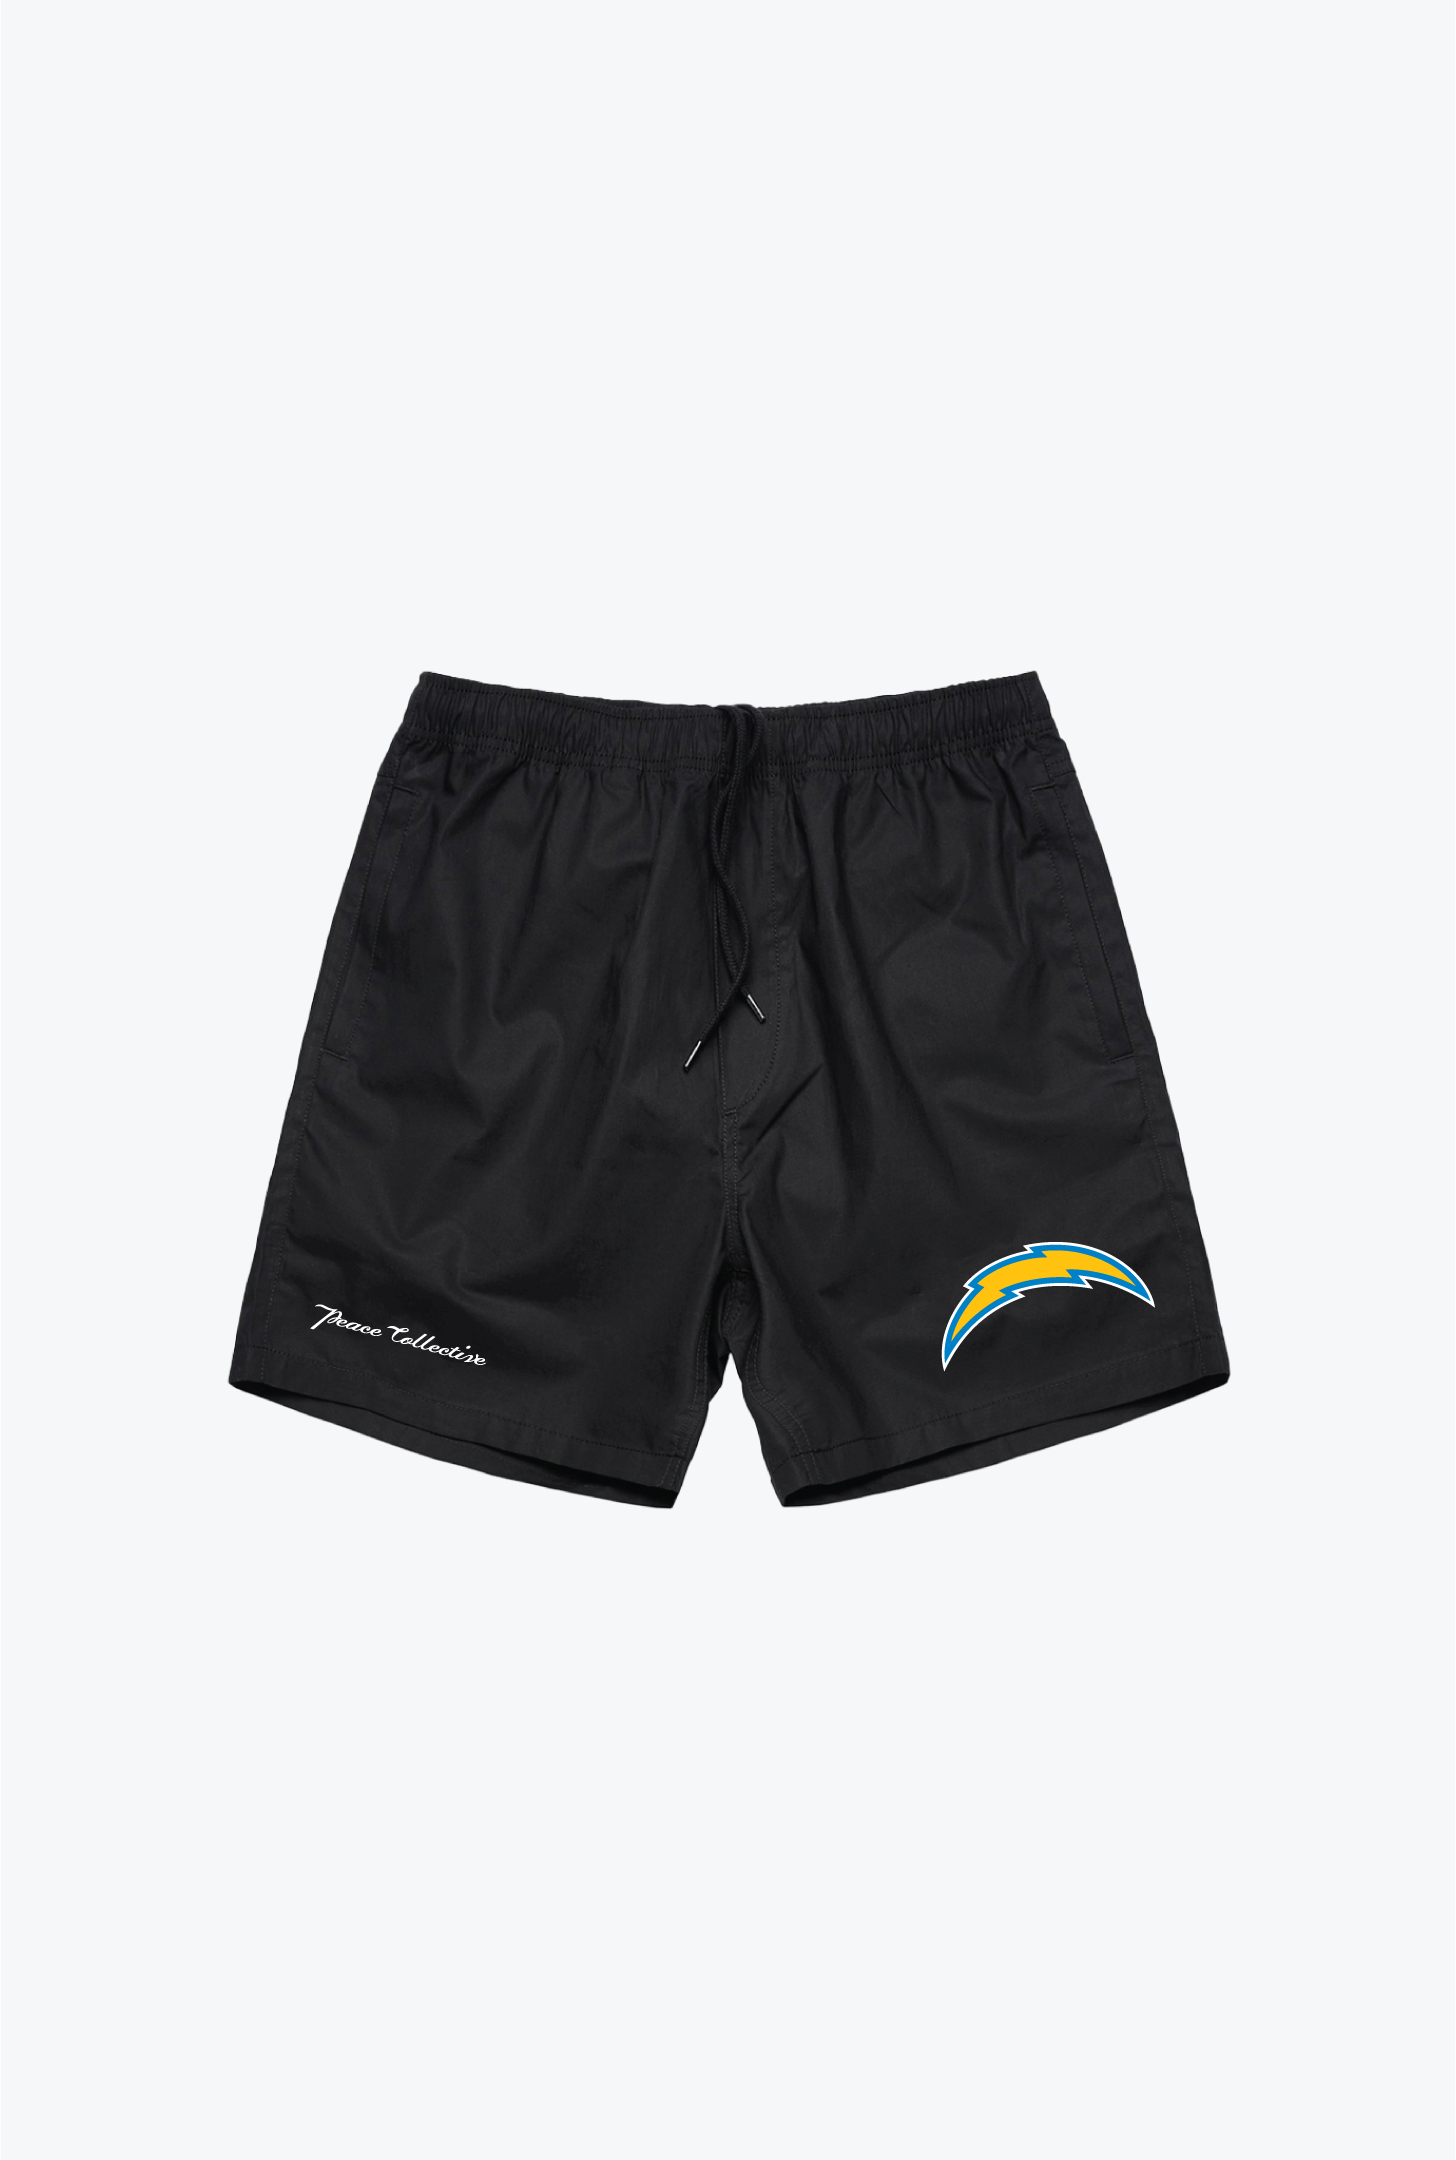 Los Angeles Chargers Board Shorts - Black